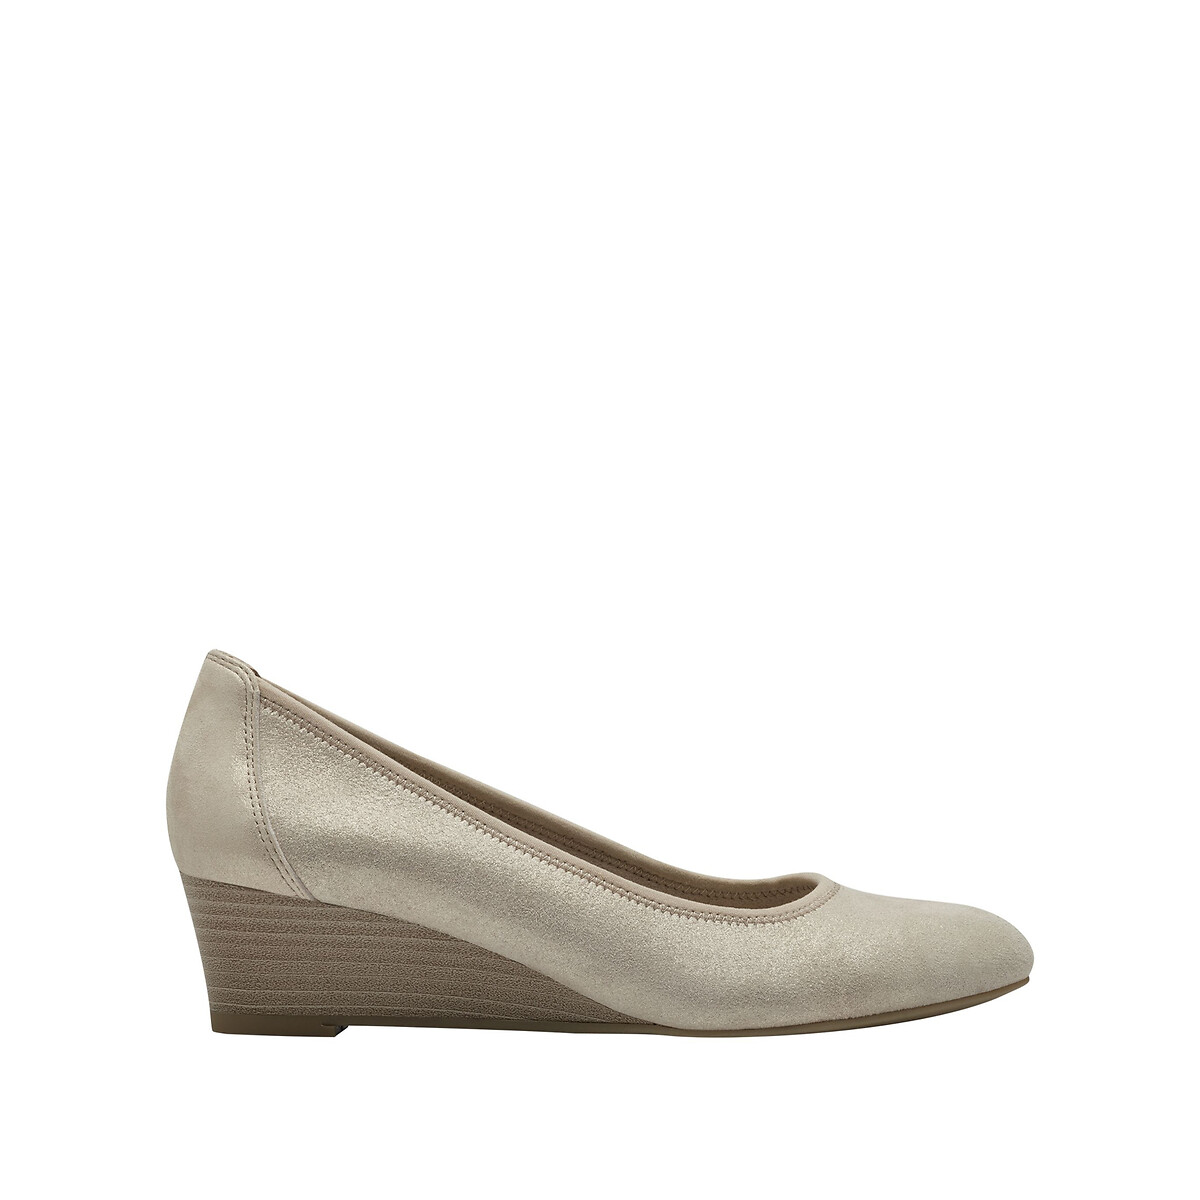 Image of Leather Ballet Pumps with Wedge Heel